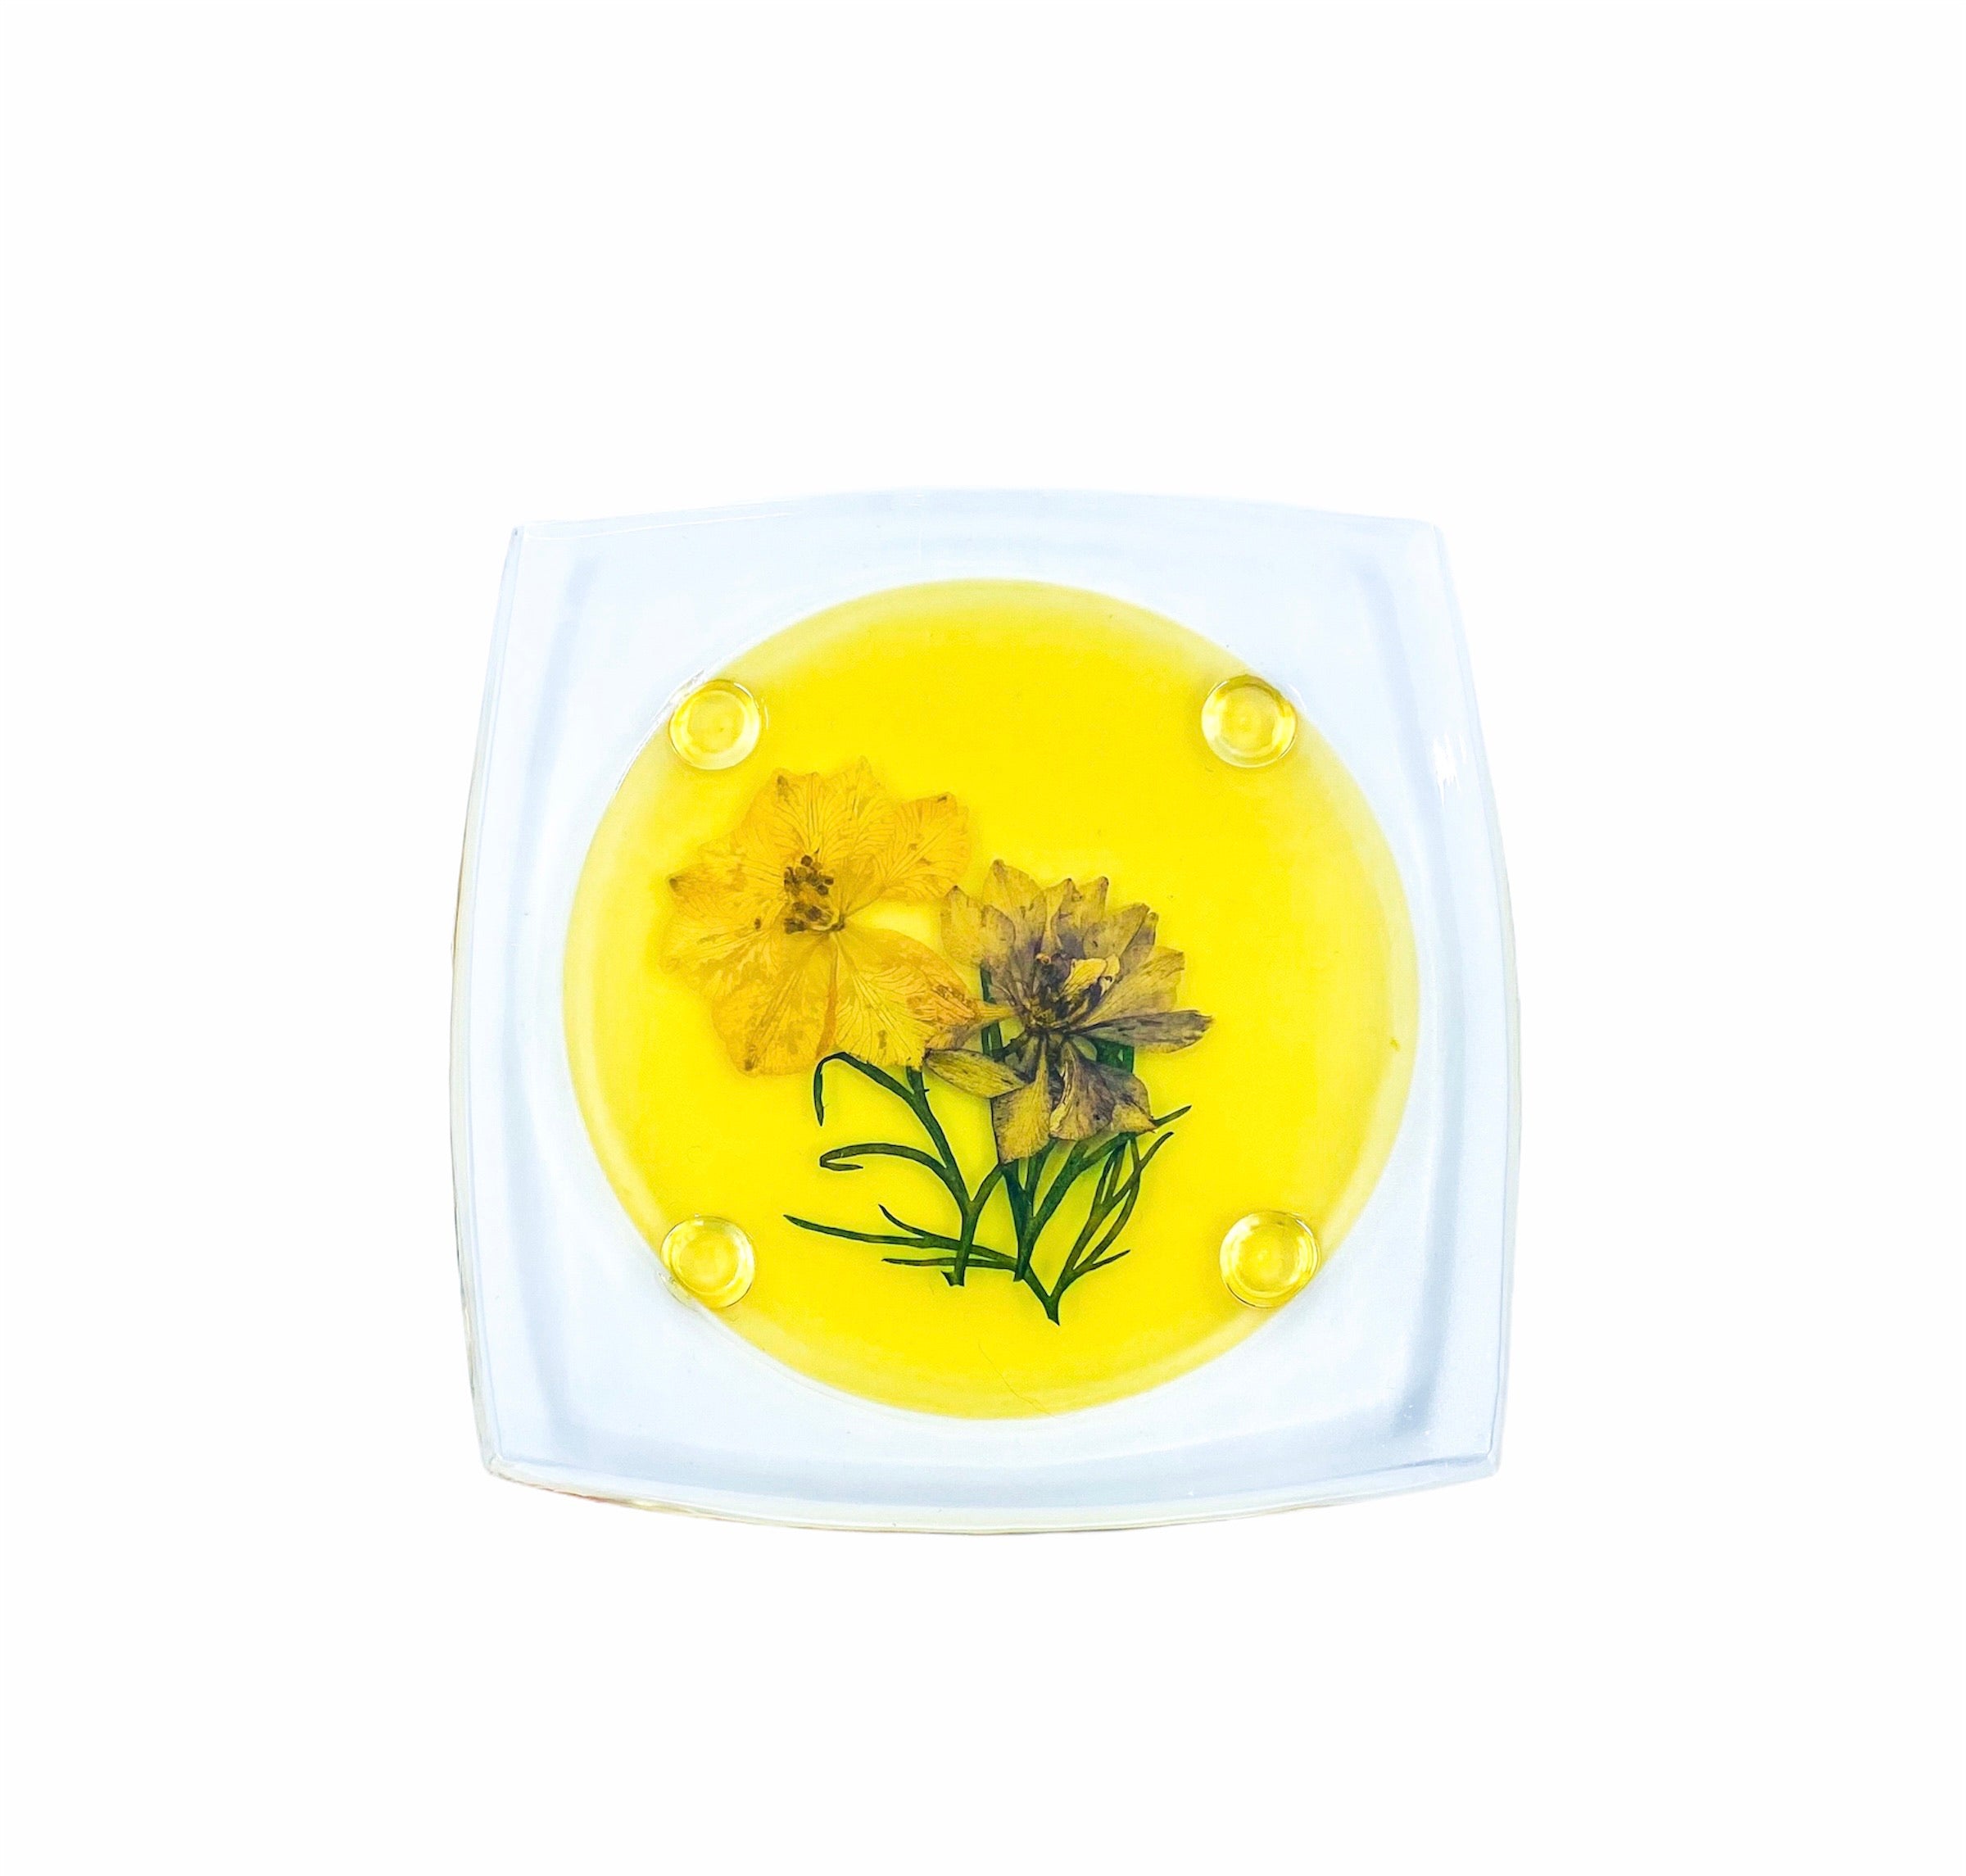 Pressed Flower Lucite Coasters, Set of 6